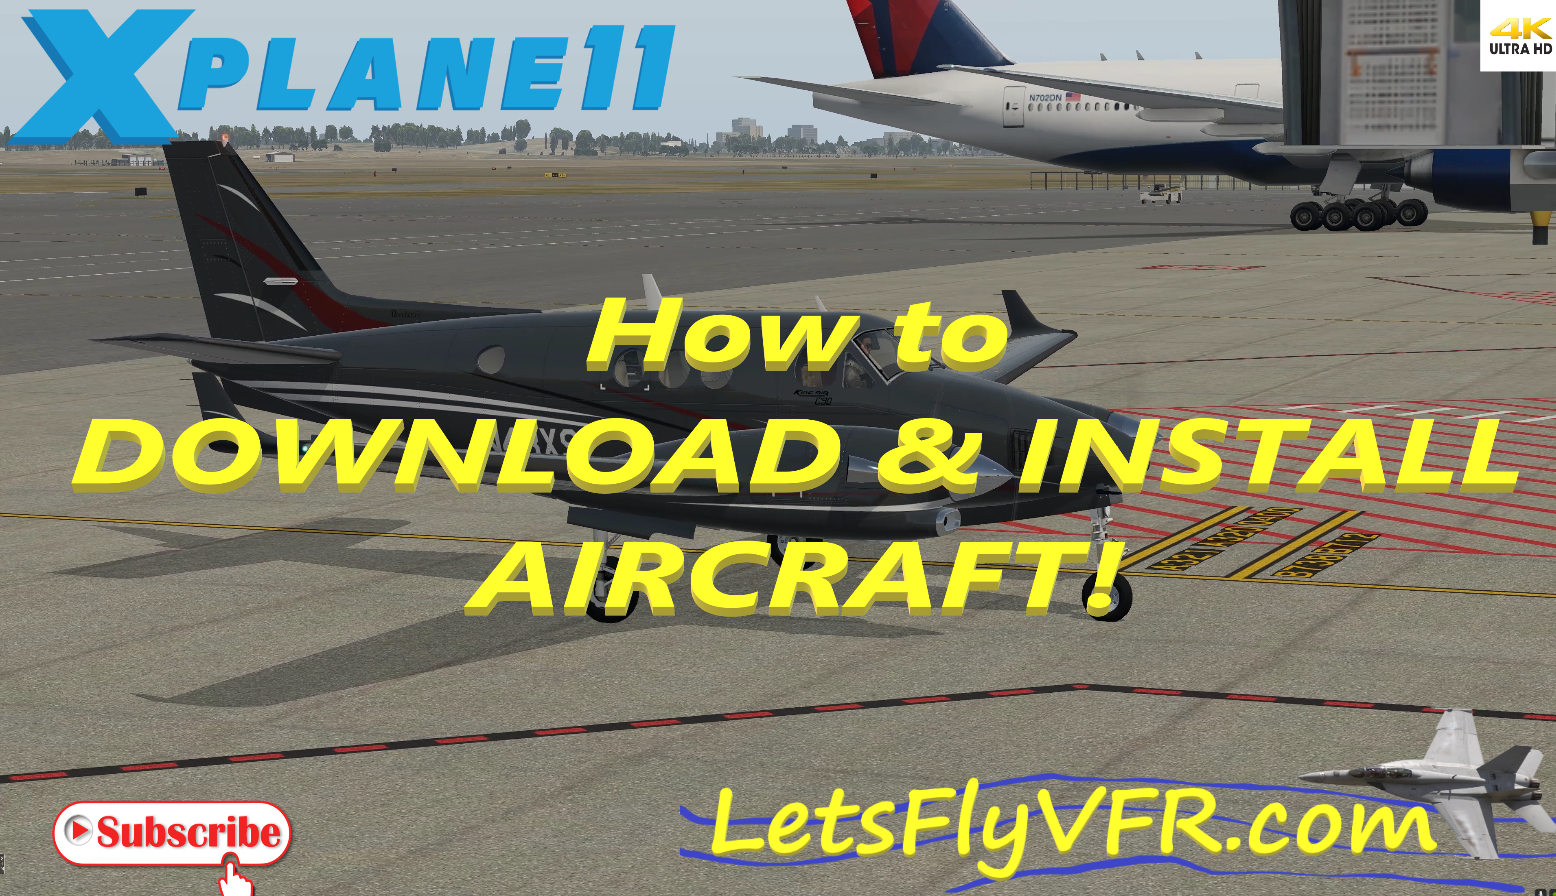 Amazing X Plane 11 Add ons and How to Install them in 5 Minutes.